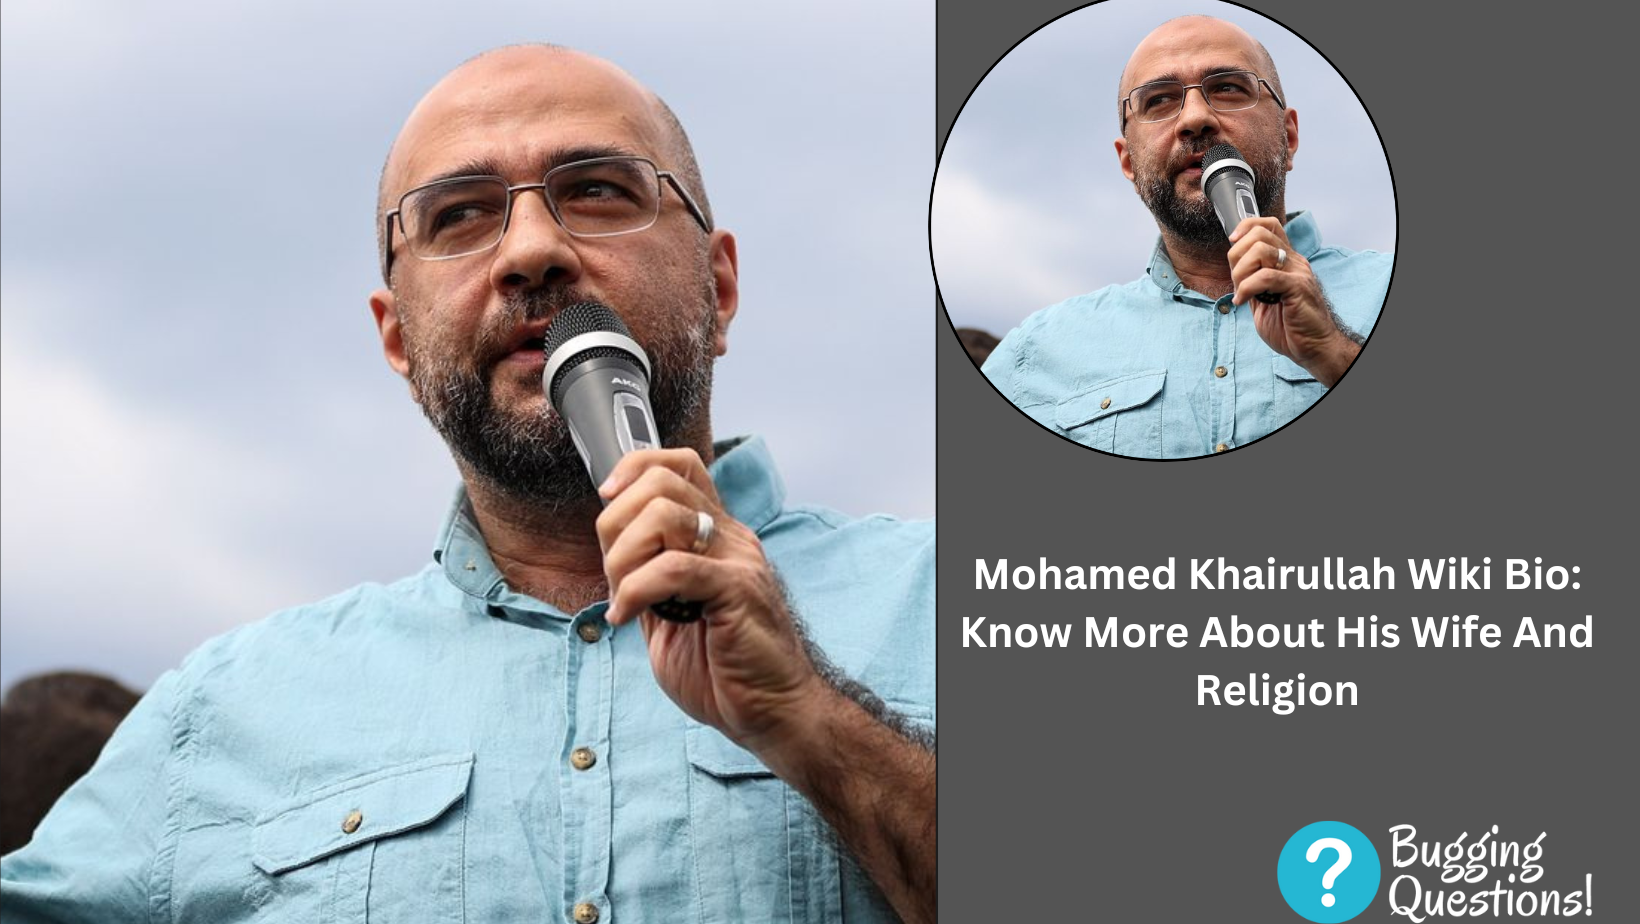 Mohamed Khairullah Wiki Bio: Know More About His Wife And Religion